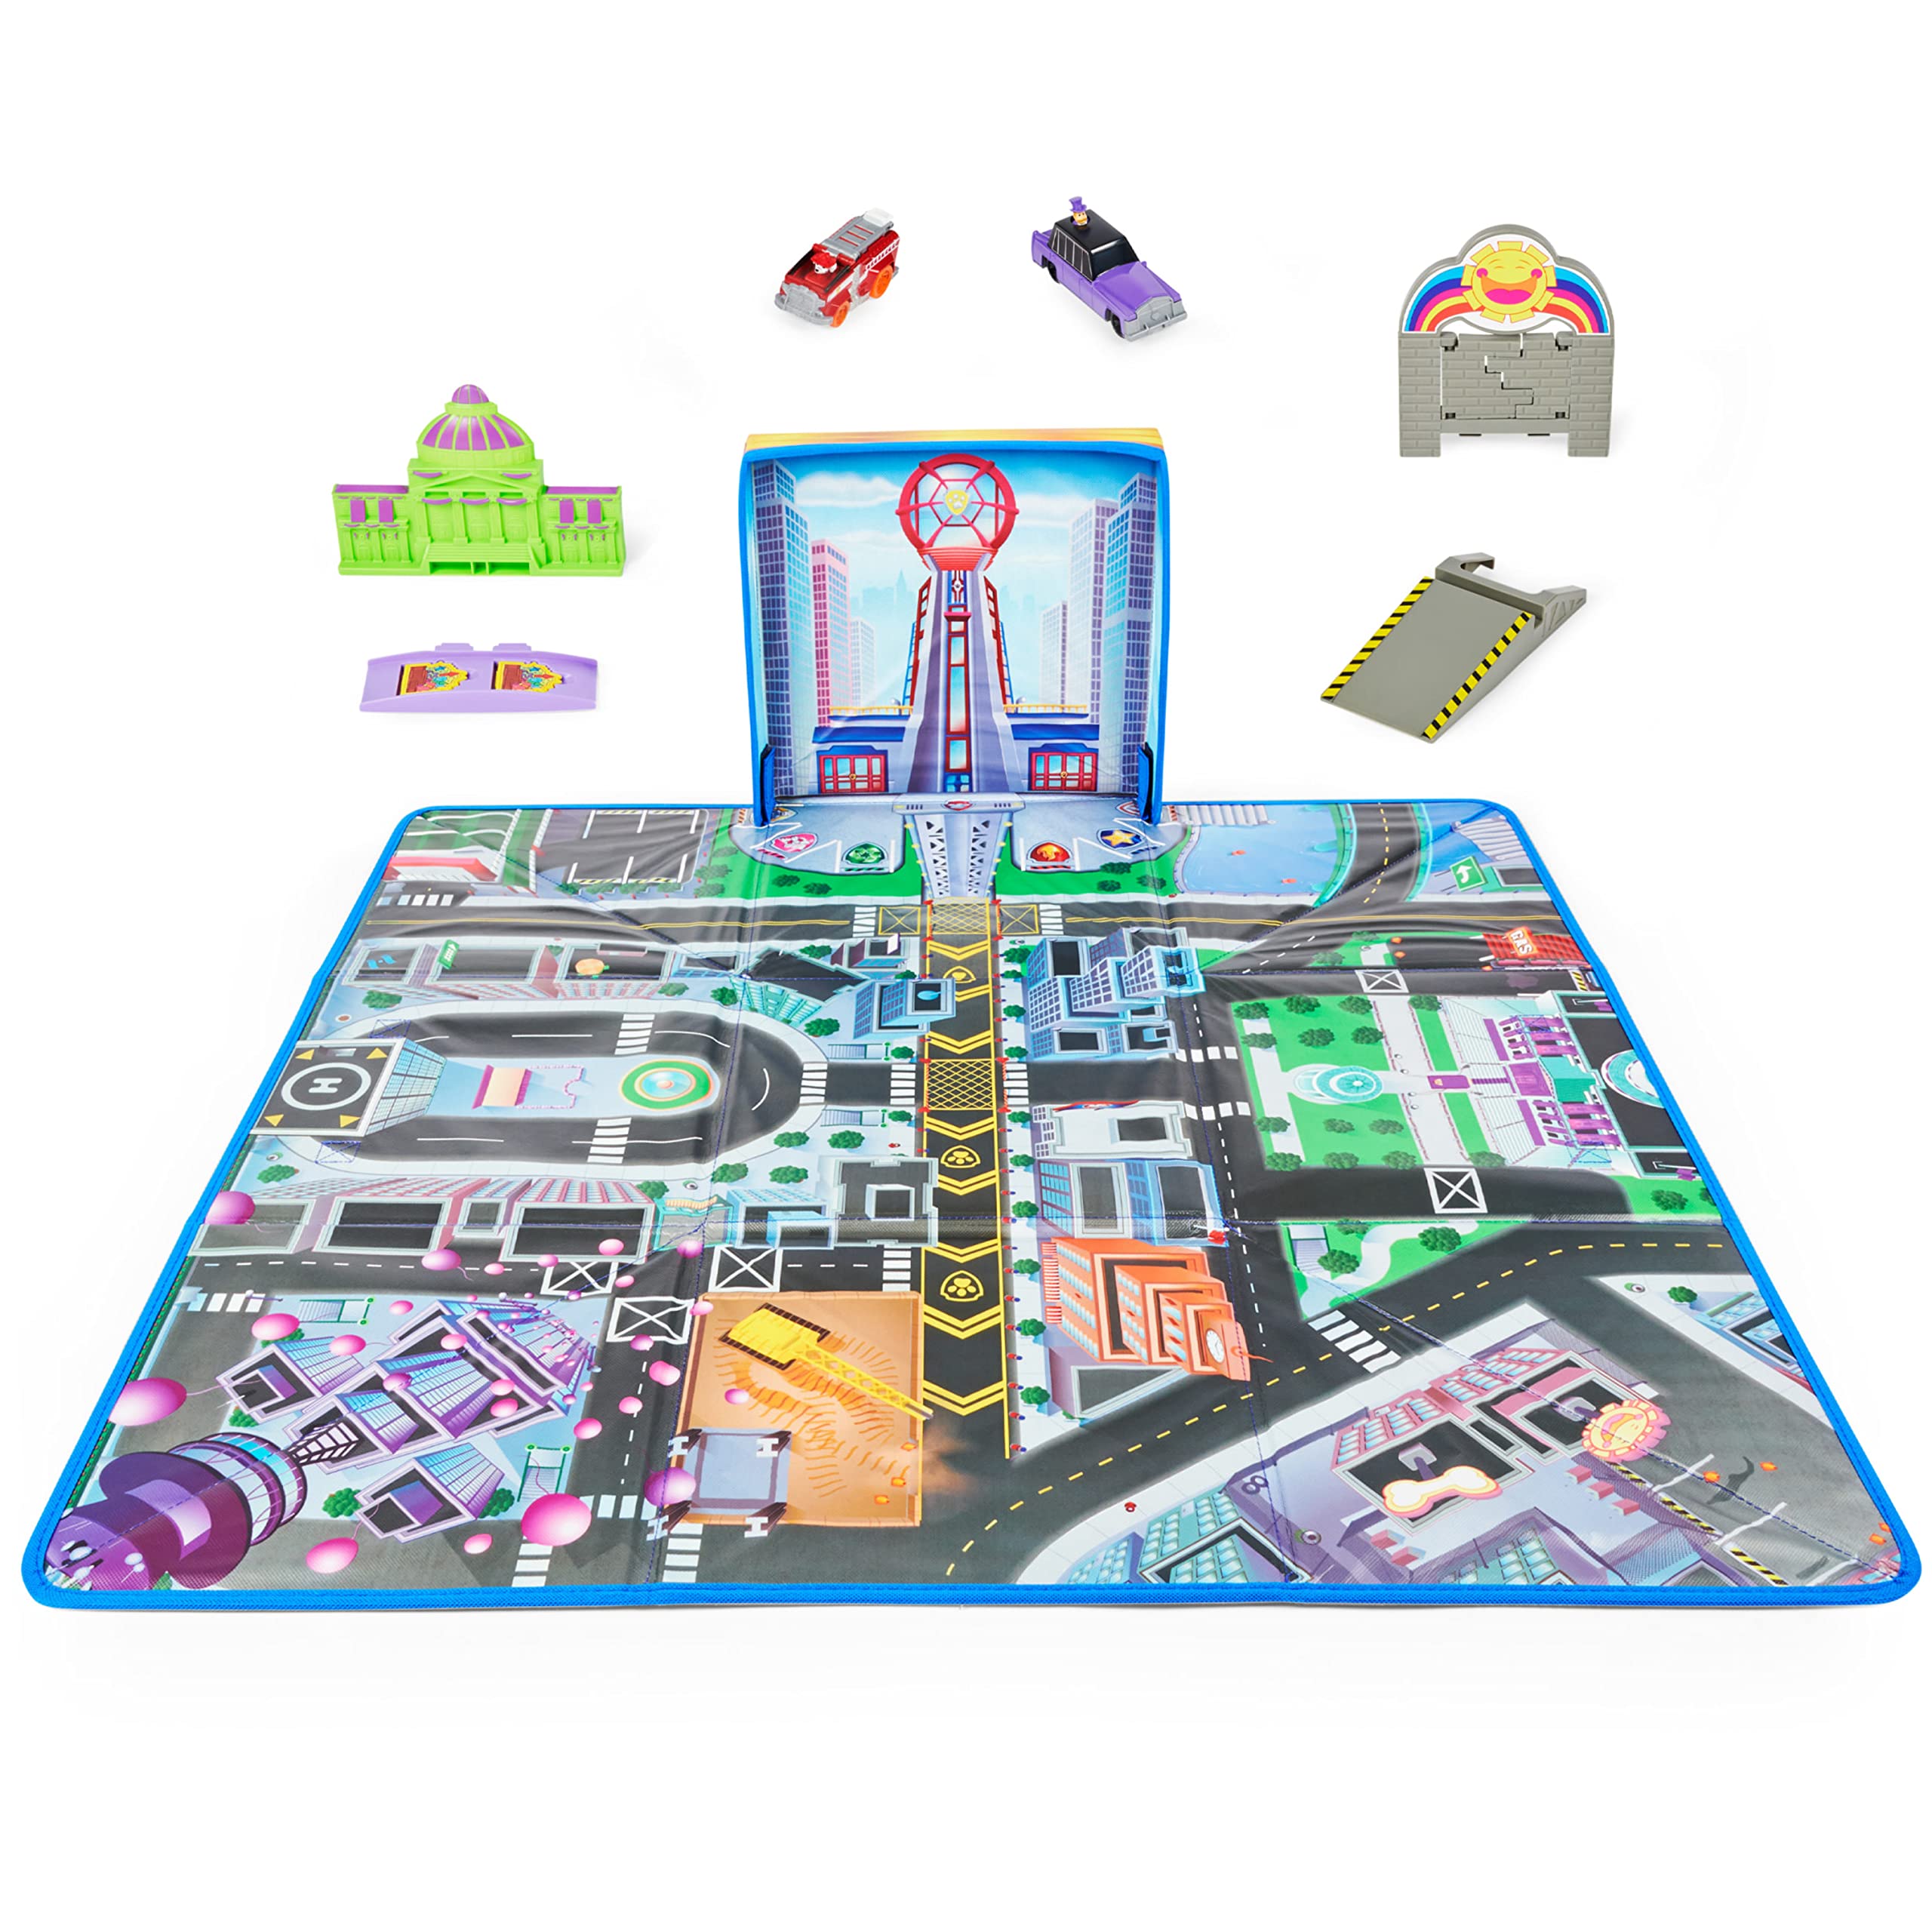 Paw Patrol, True Metal Adventure City Movie Play Mat Set with 2 Exclusive Toy Cars (Amazon Exclusive), 1:55 Scale, Kids Toys for Ages 3 and Up